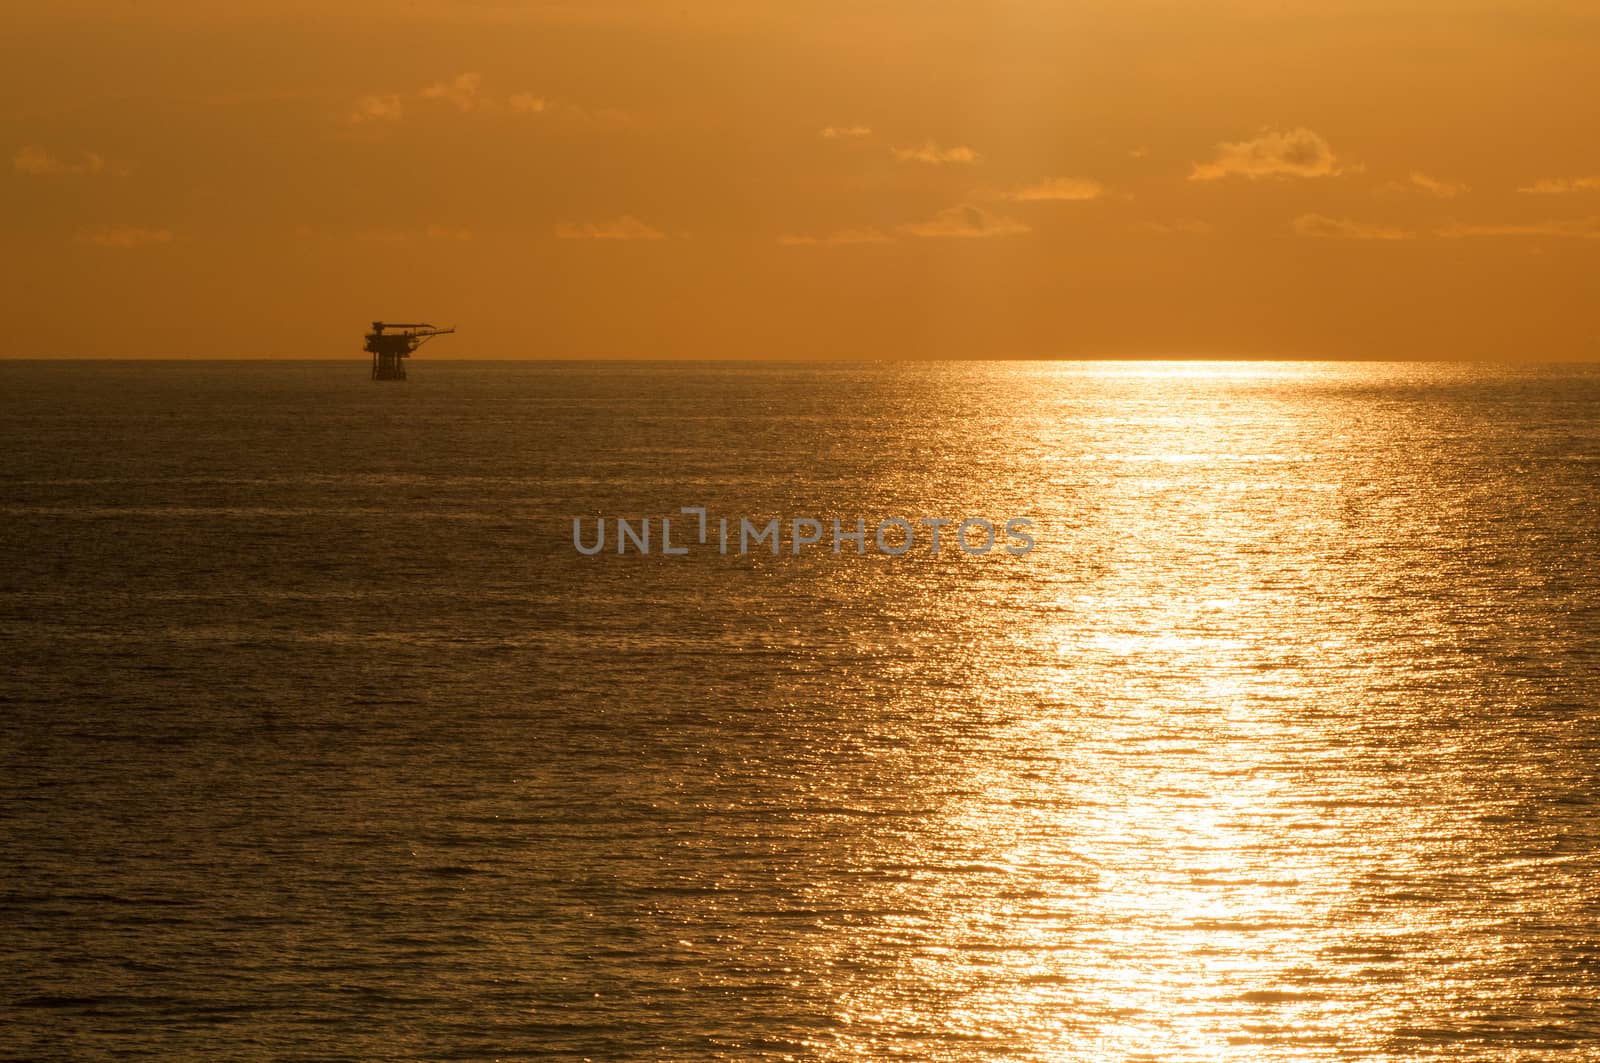 offshore rig in sunset by think4photop